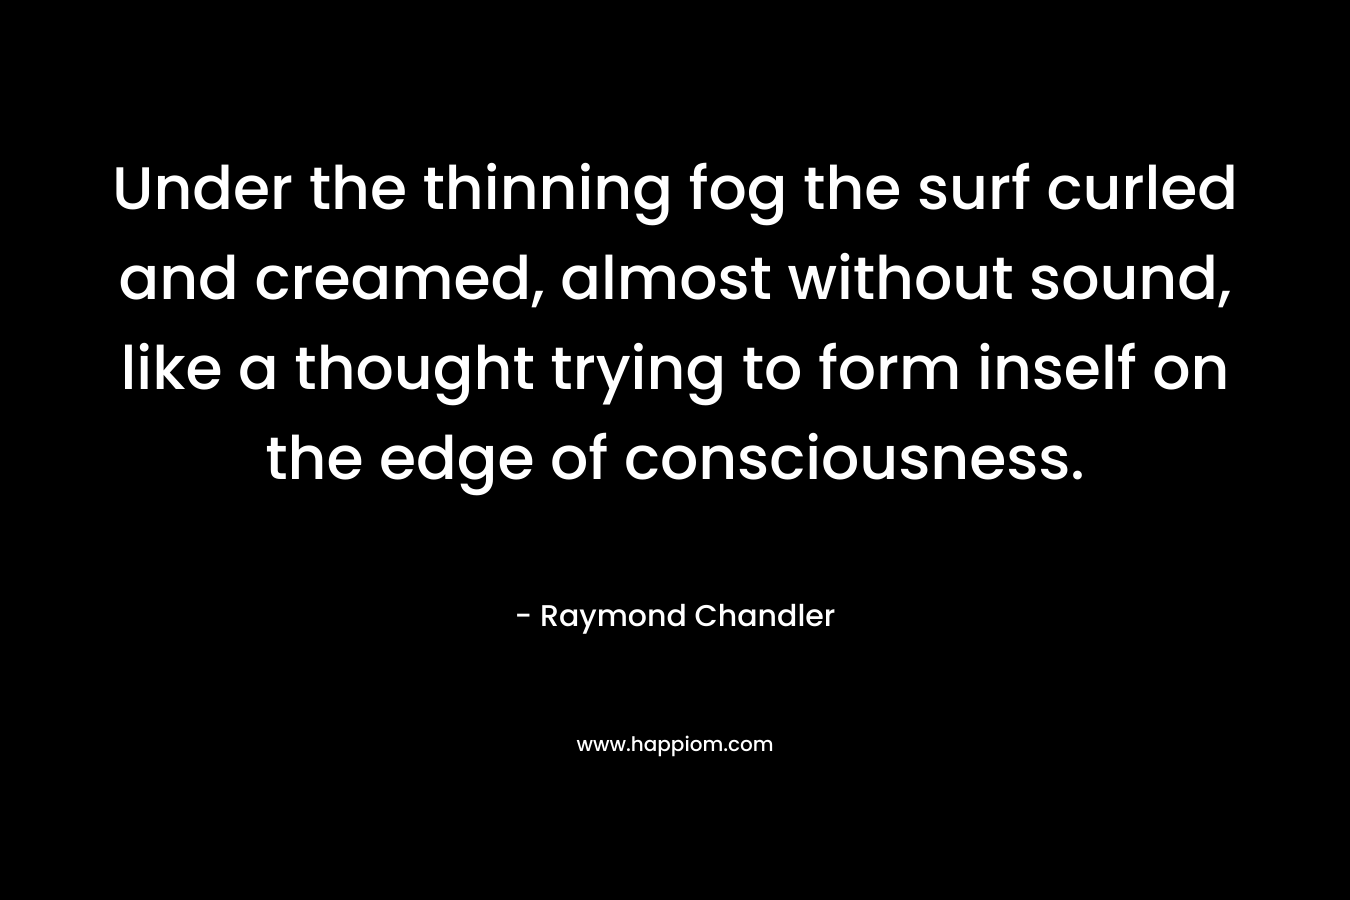 Under the thinning fog the surf curled and creamed, almost without sound, like a thought trying to form inself on the edge of consciousness. – Raymond Chandler